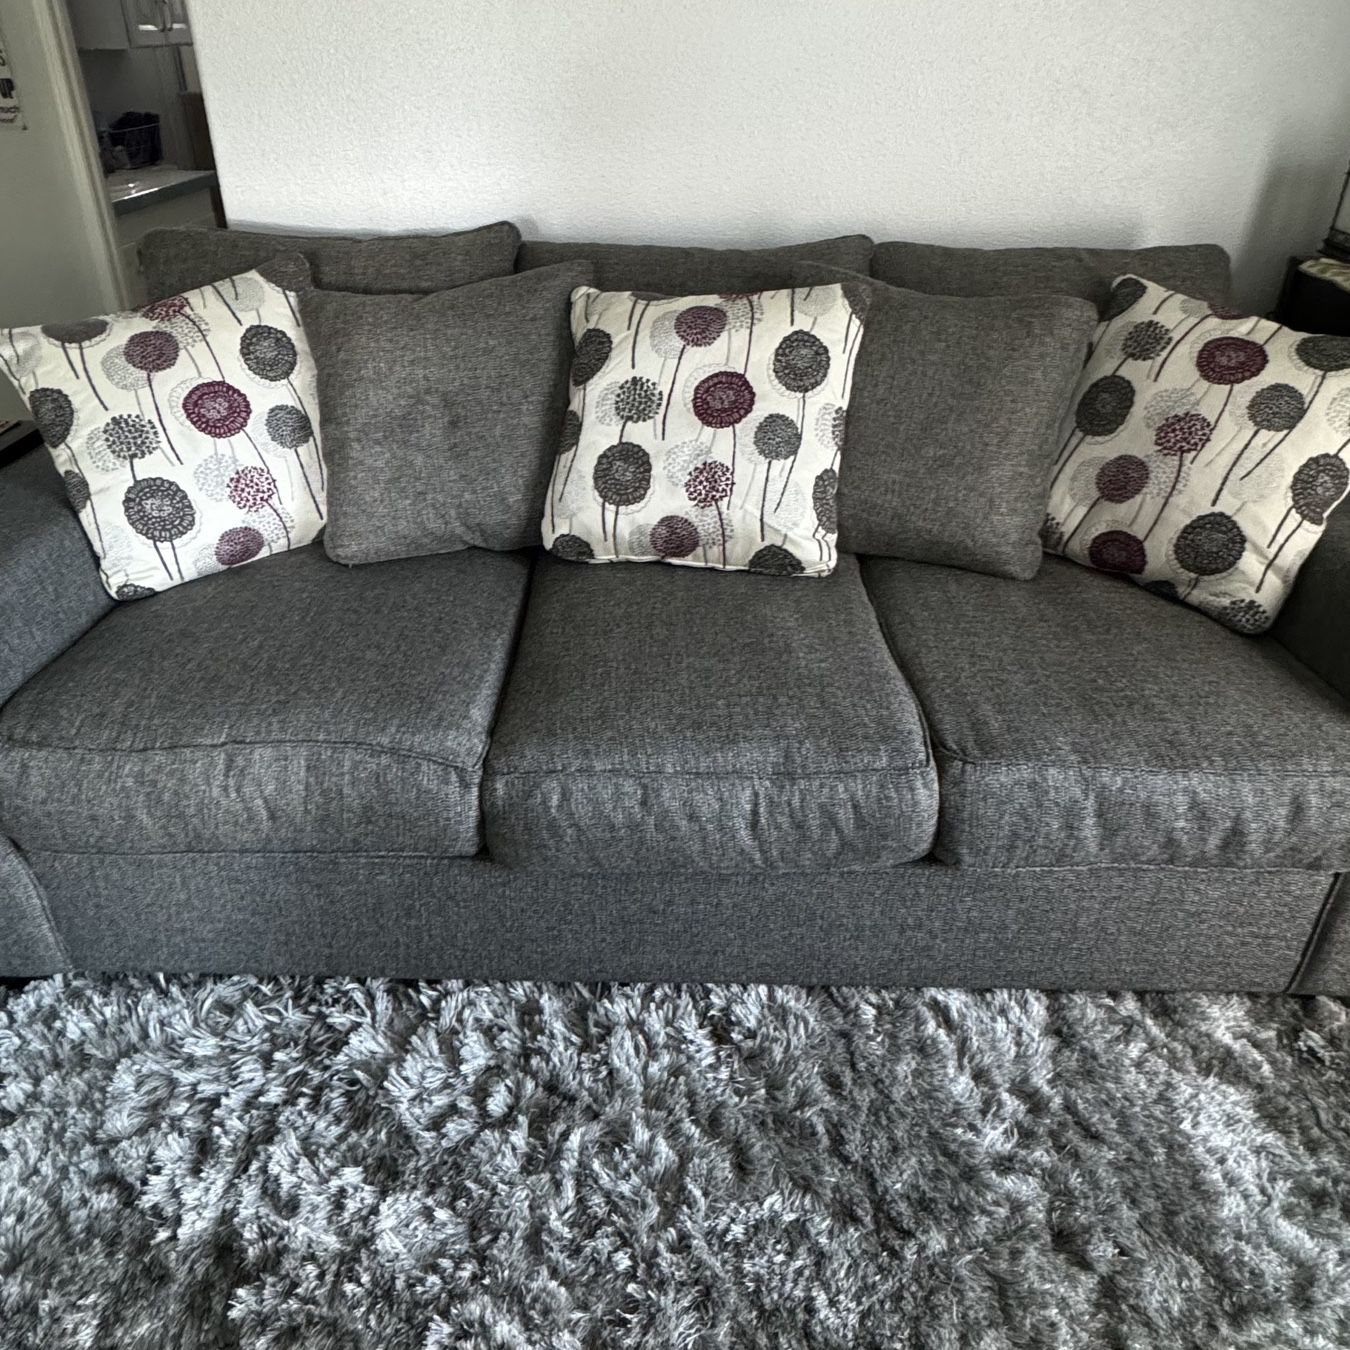 Down Couch - Excellent Condition     $500.  PASCO